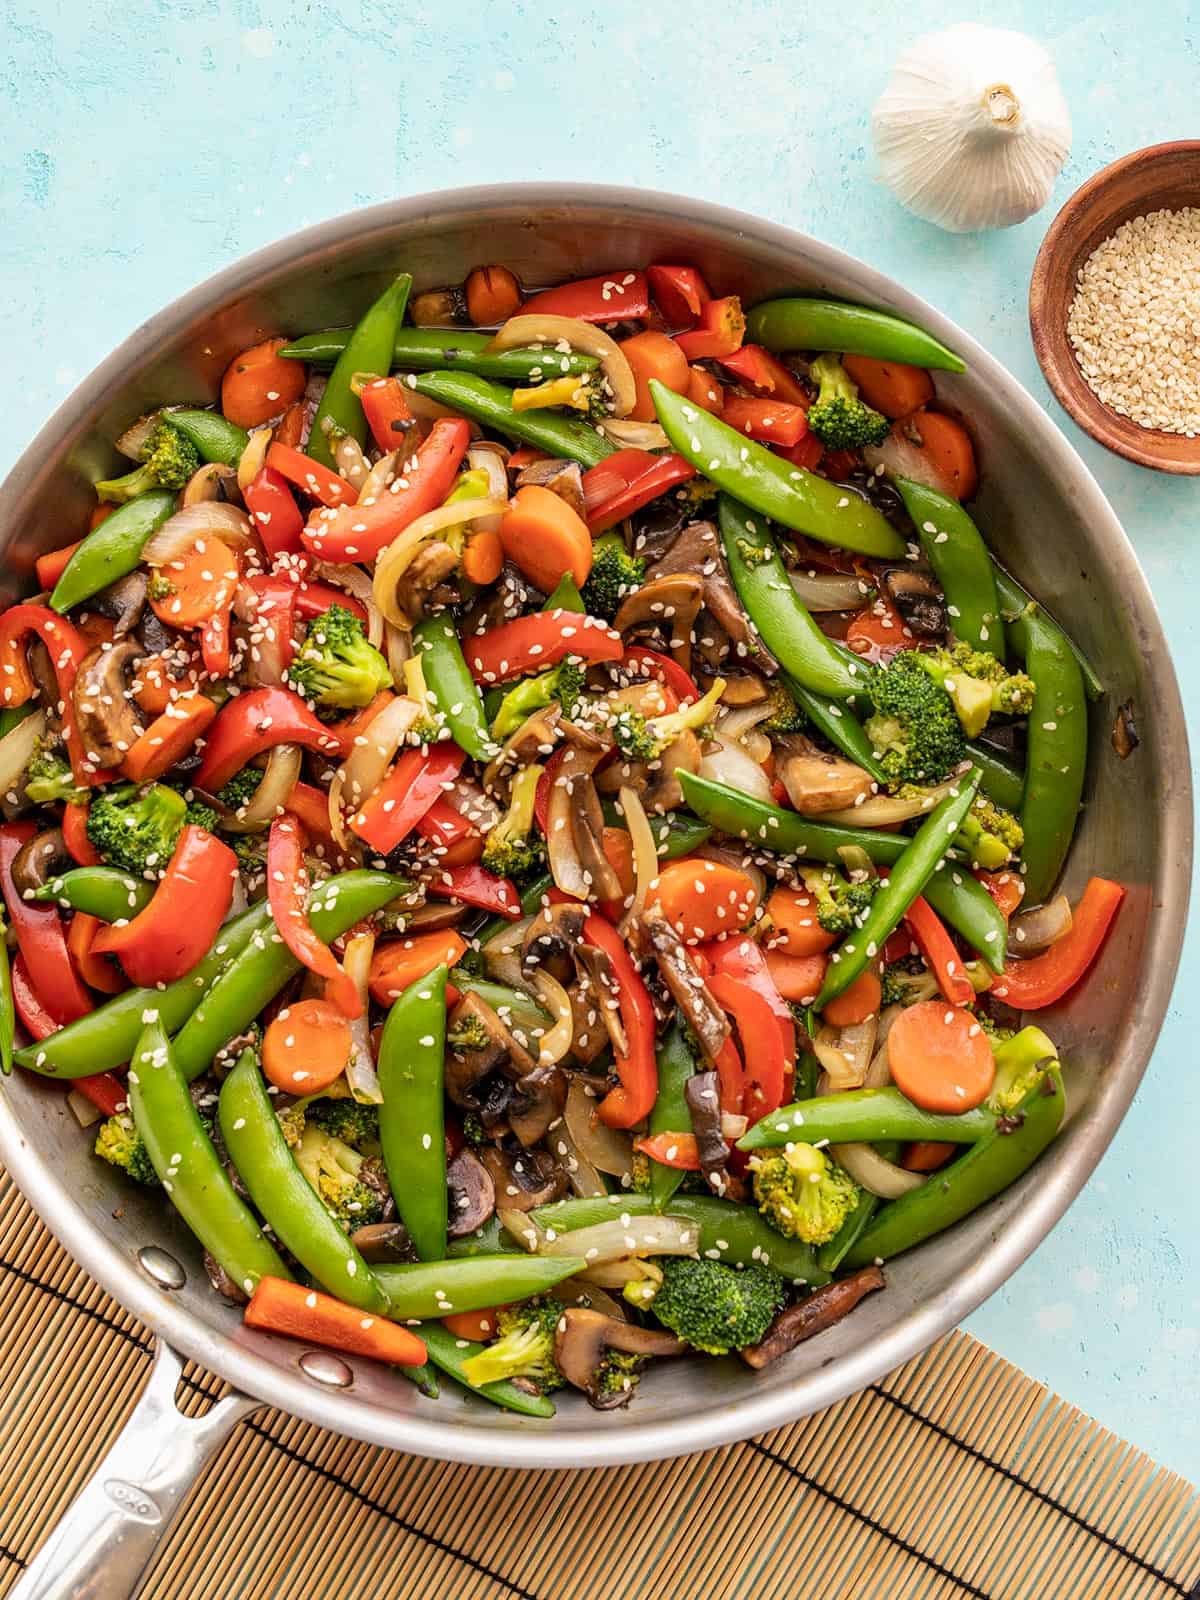 Stir Fry Vegetables (Quick & Easy!) - Wholesome Yum